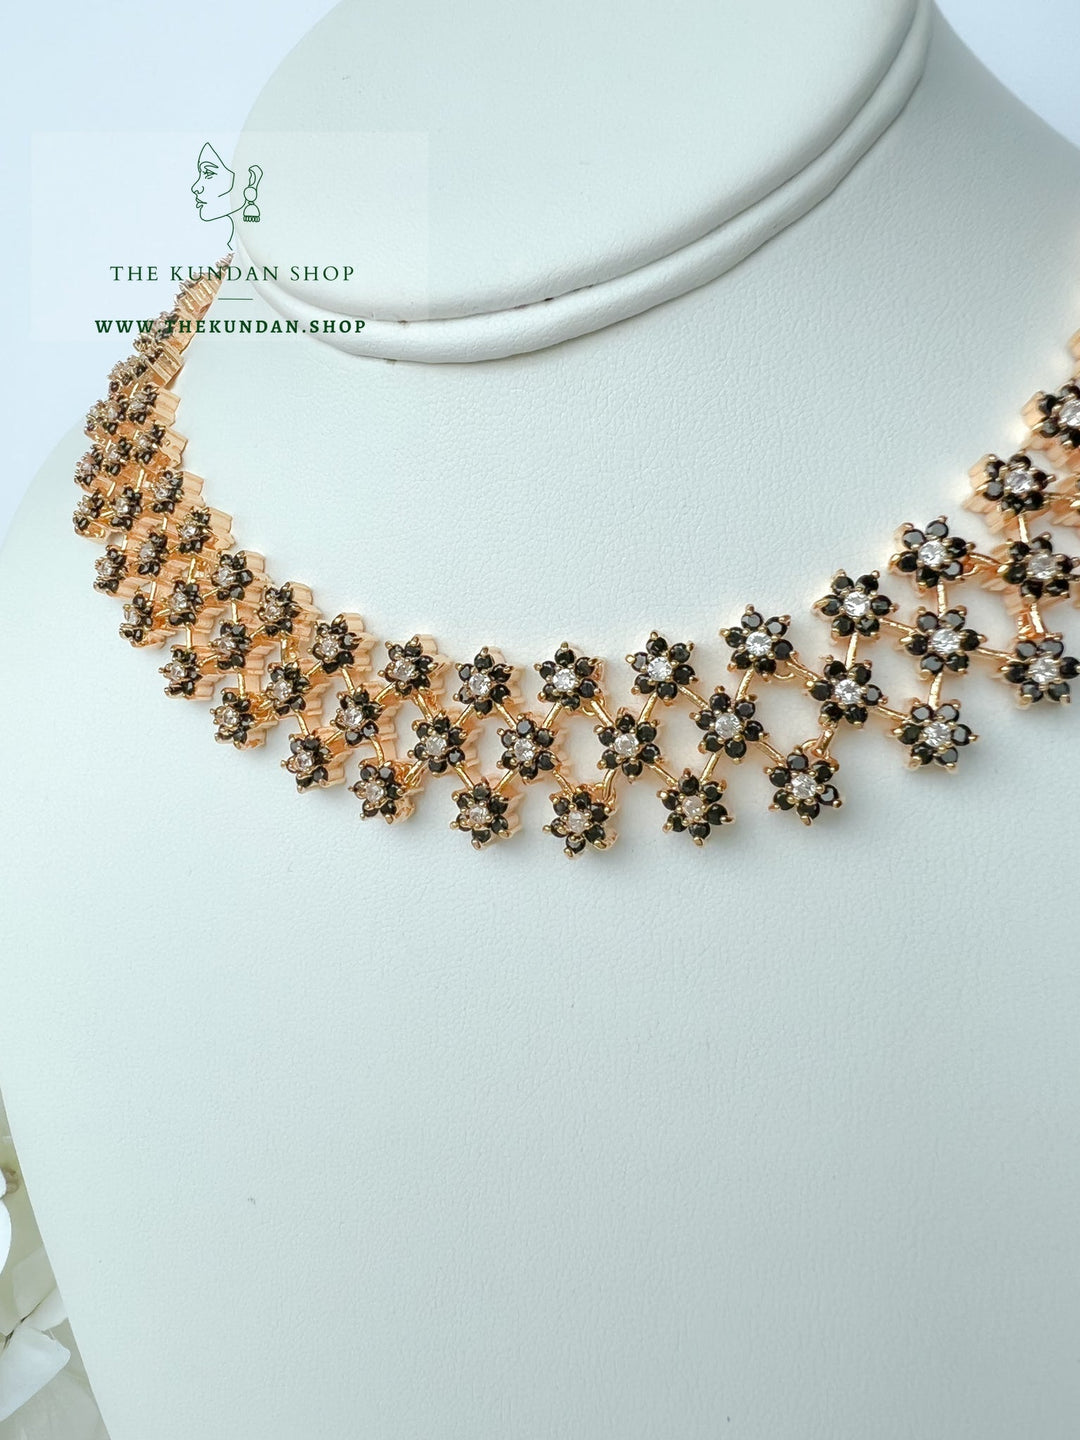 Consequential in Black Necklace Sets THE KUNDAN SHOP 